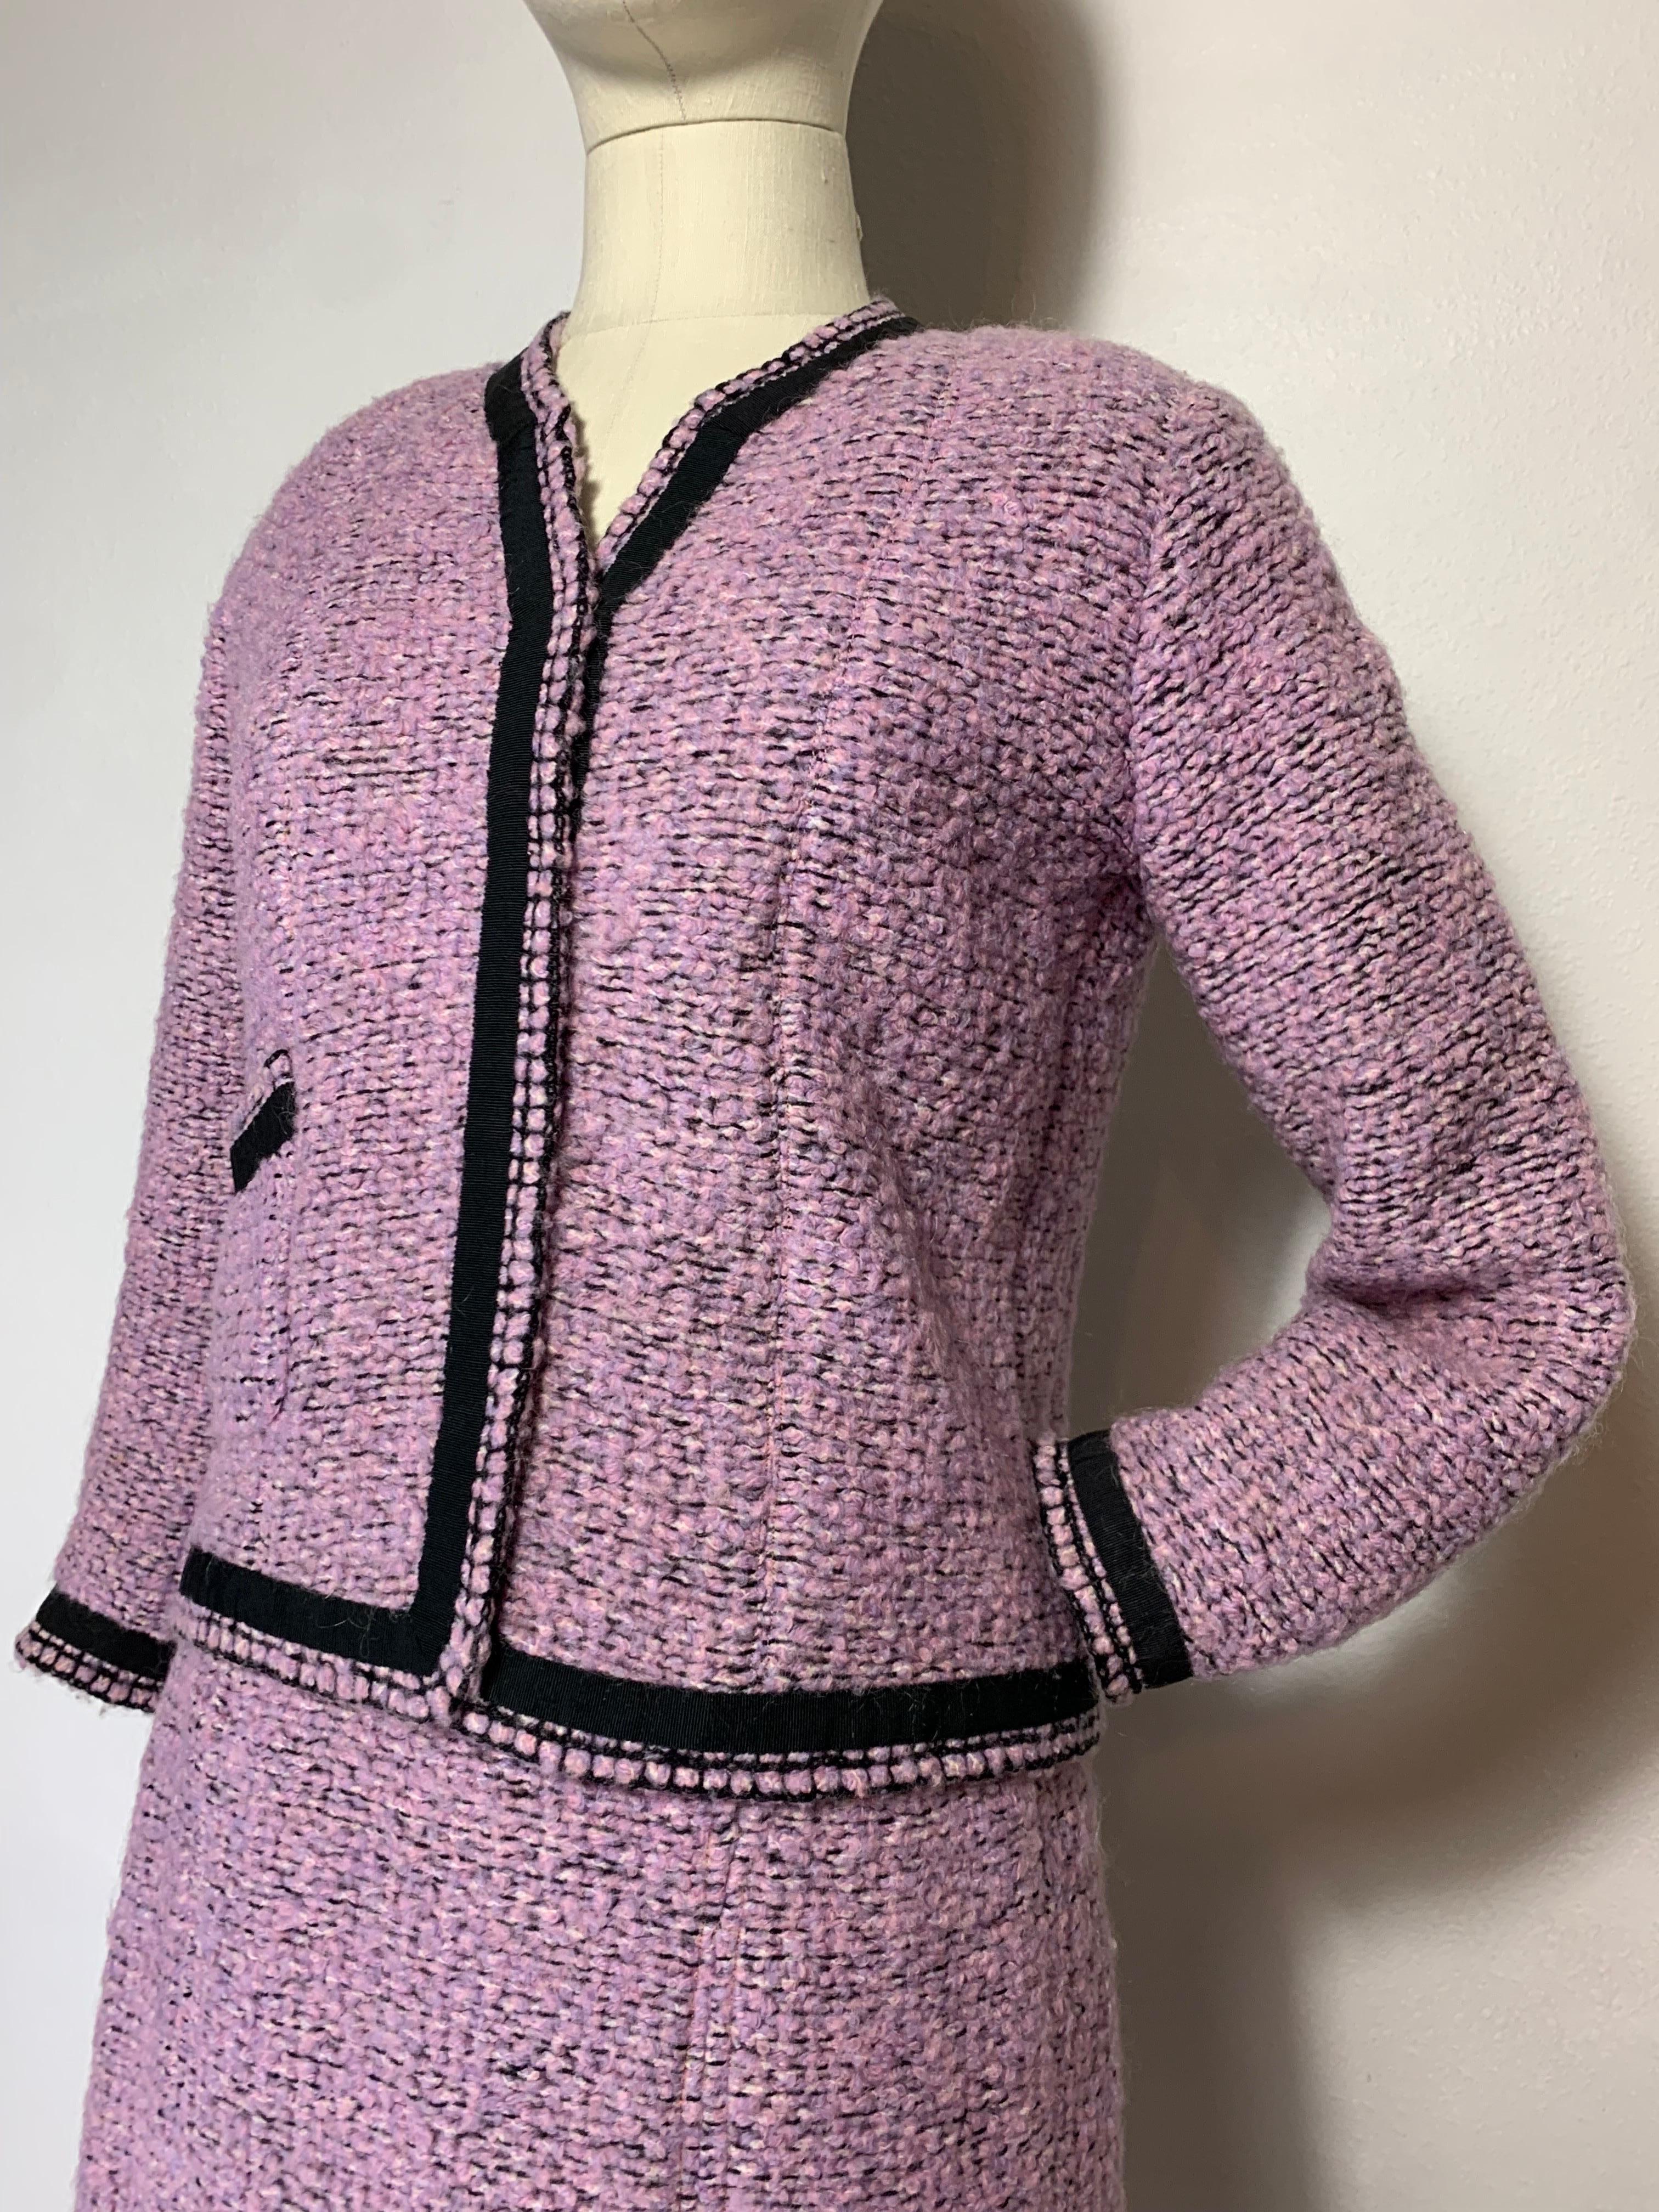 1960 Autumn/Winter Chanel Haute Couture Documented Lavender Tweed Skirt Suit  For Sale 3